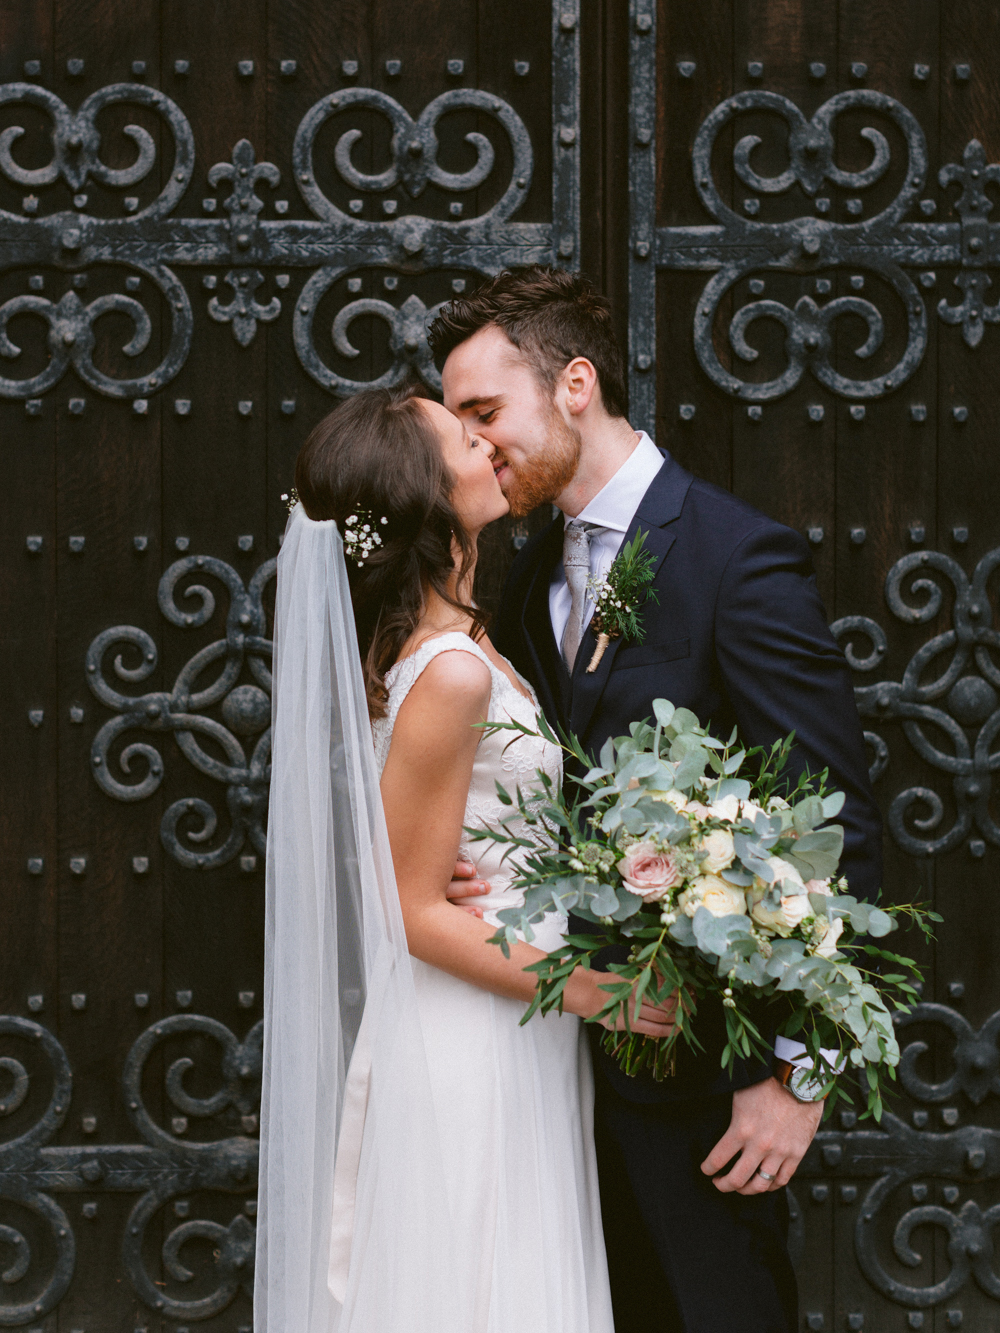 Bride and Groom kiss outside the church at this romantic Cotswolds wedding